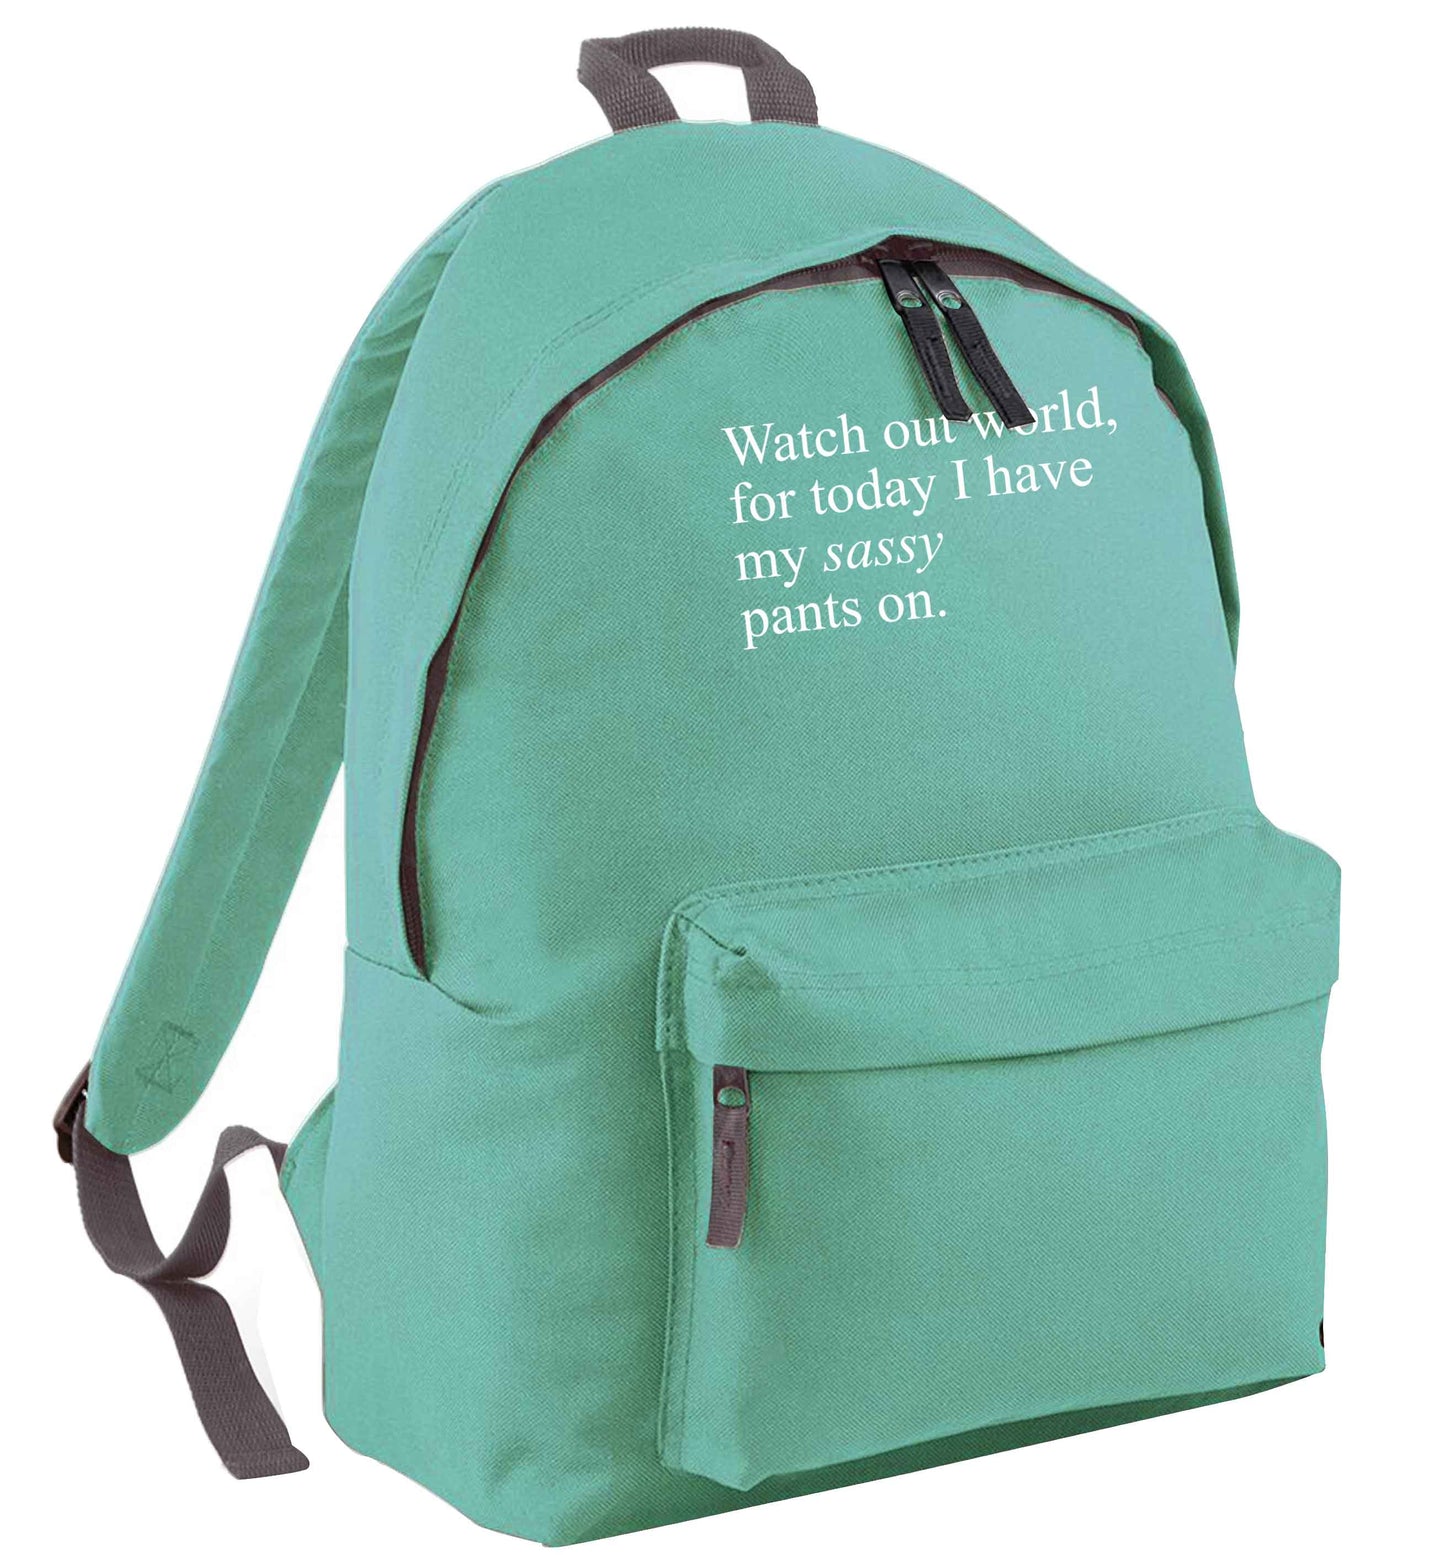 Watch out world for today I have my sassy pants on mint adults backpack